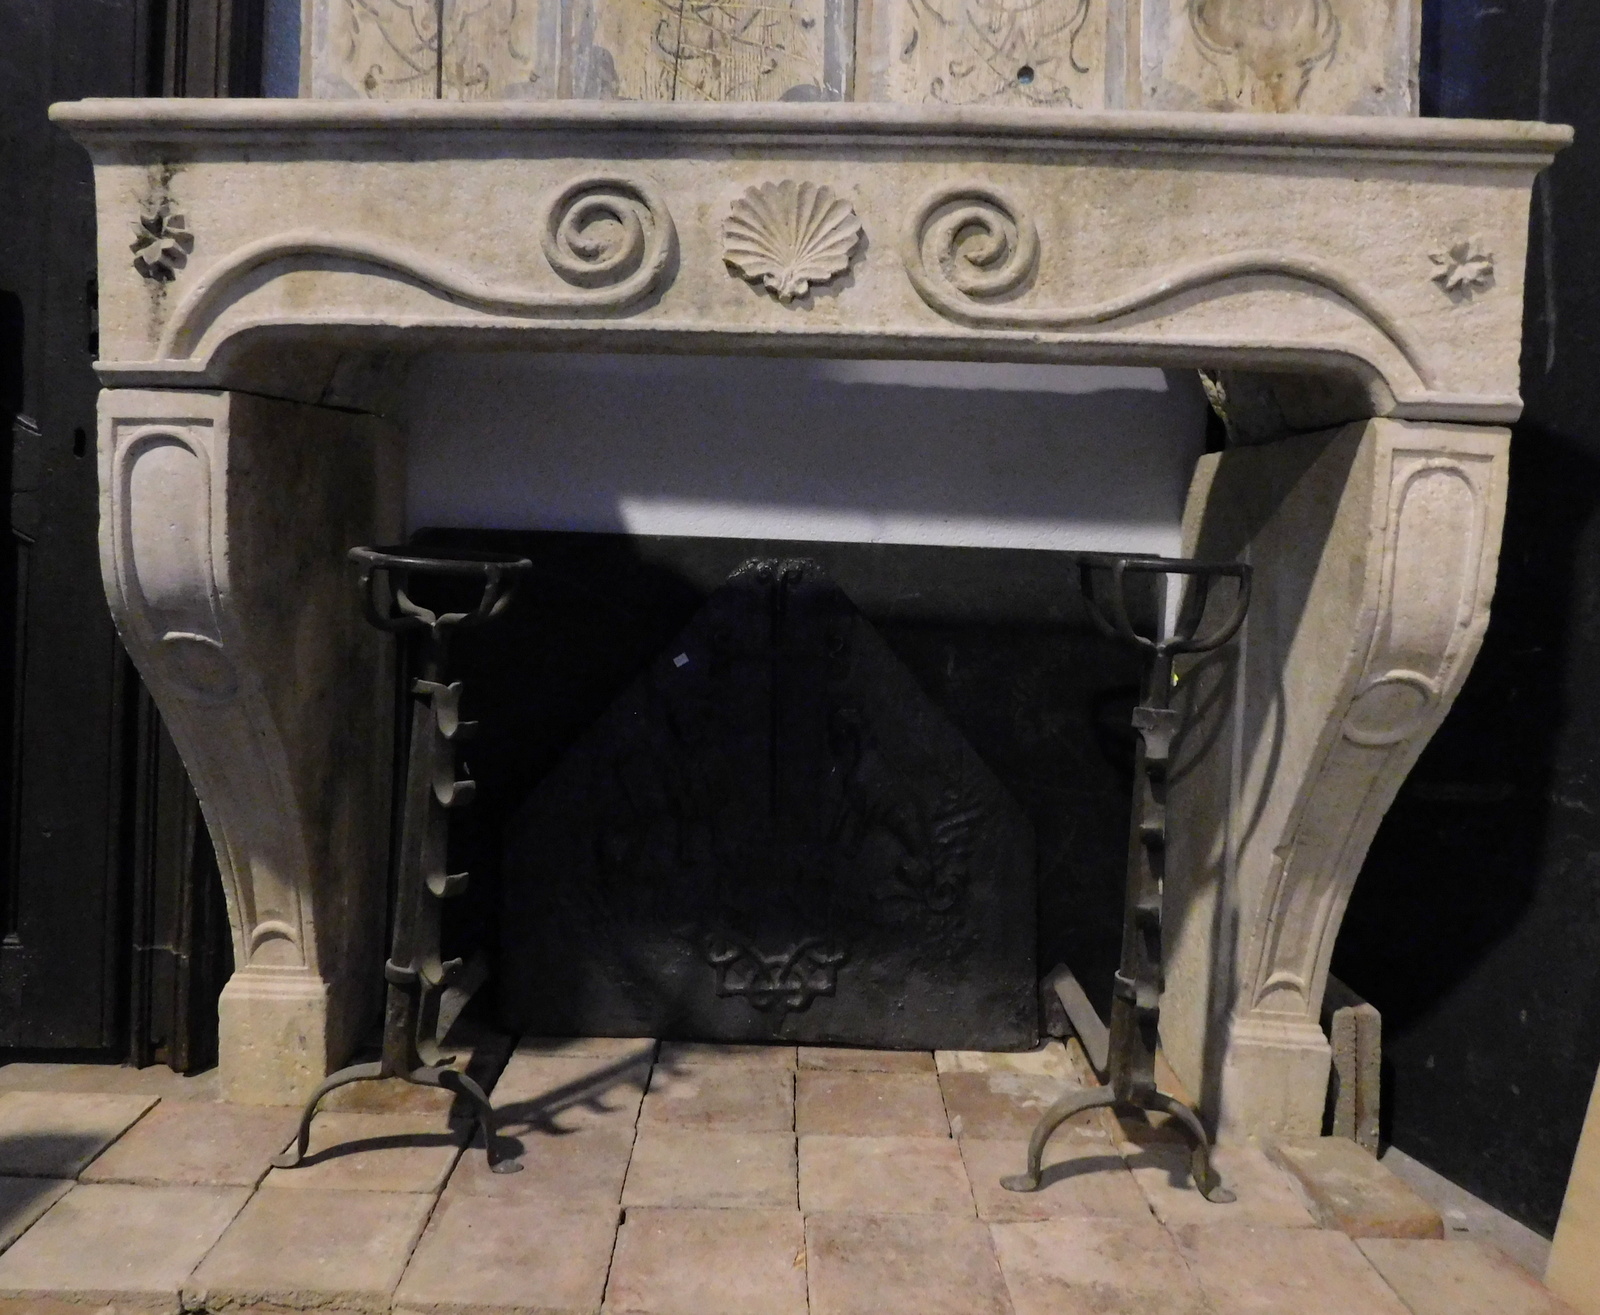 chp328 - Burgundy stone fireplace with carved central shell,  w 160 x h 129